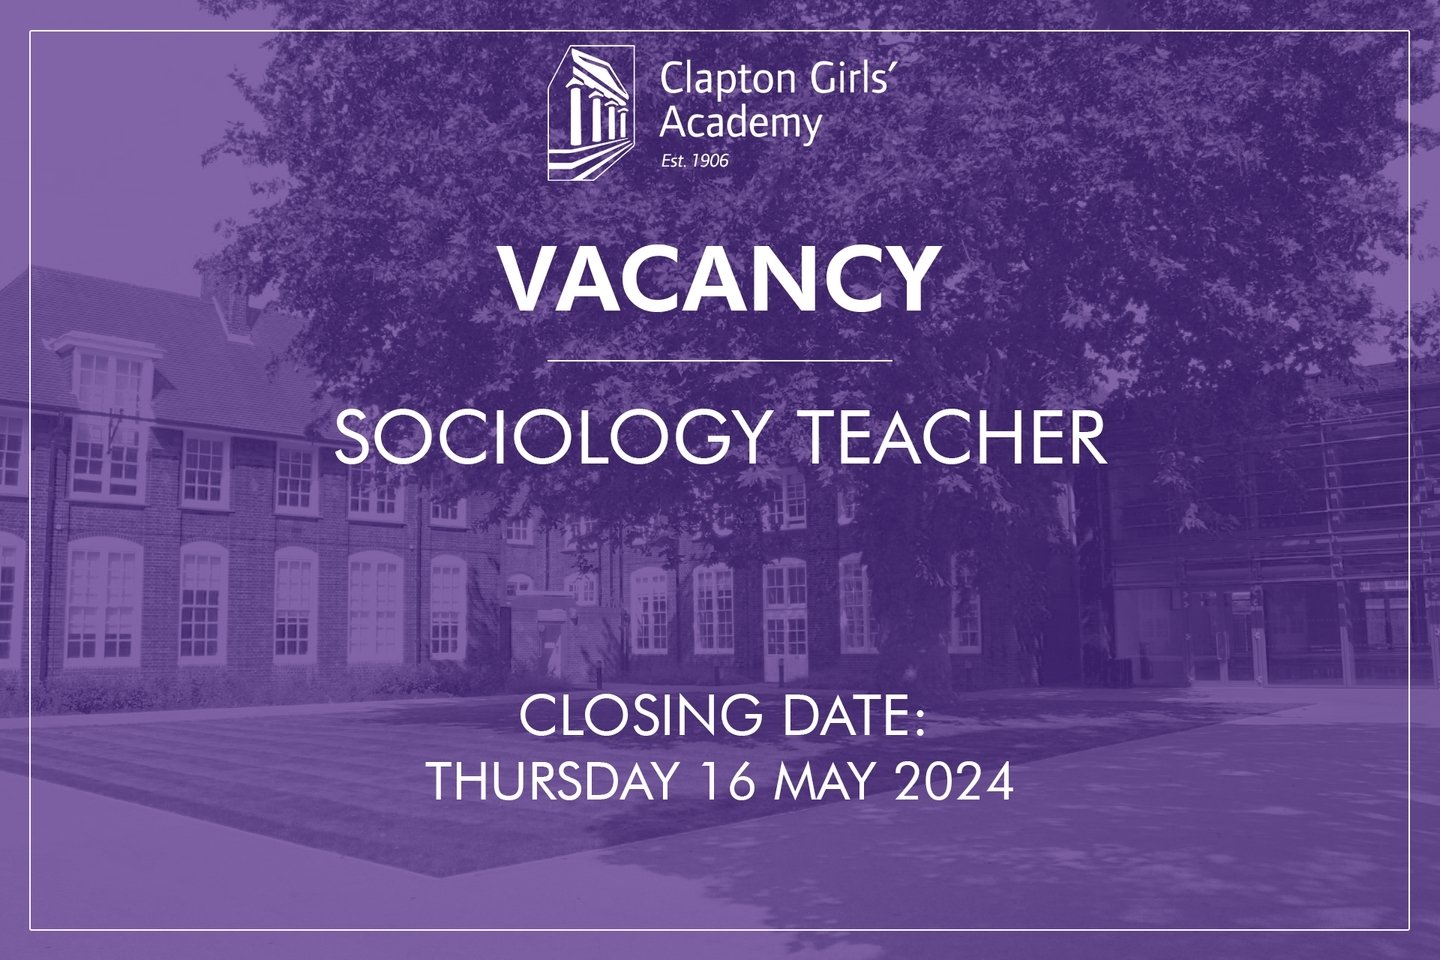 Do you have the experience and knowledge to teach KS4 &amp; KS5 students Sociology? Then don't miss this opportunity! 👩&zwj;🏫

Please click the link in our bio for more information or to APPLY NOW! ⬆️

#vacancy #jobalert